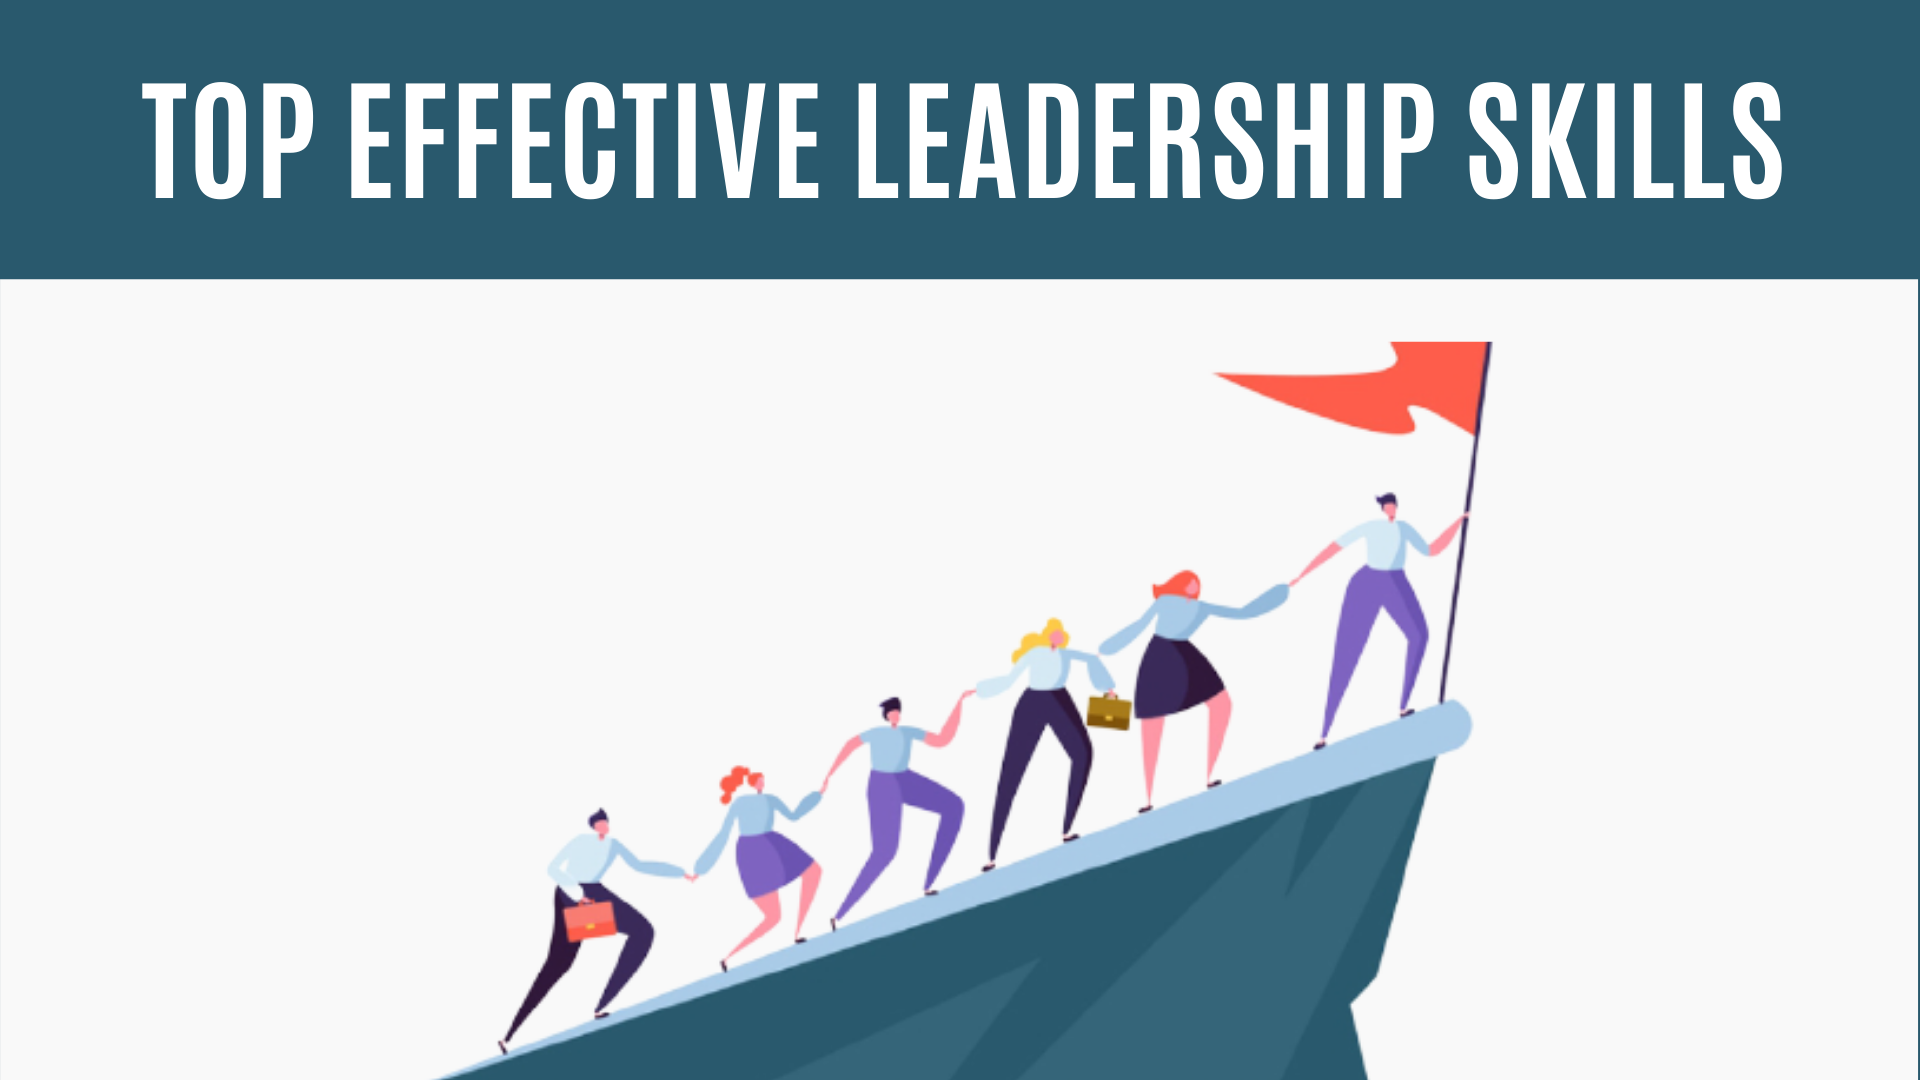 a-leader-in-the-workplace-here-are-the-effective-leadership-skills-you-need-to-have-by